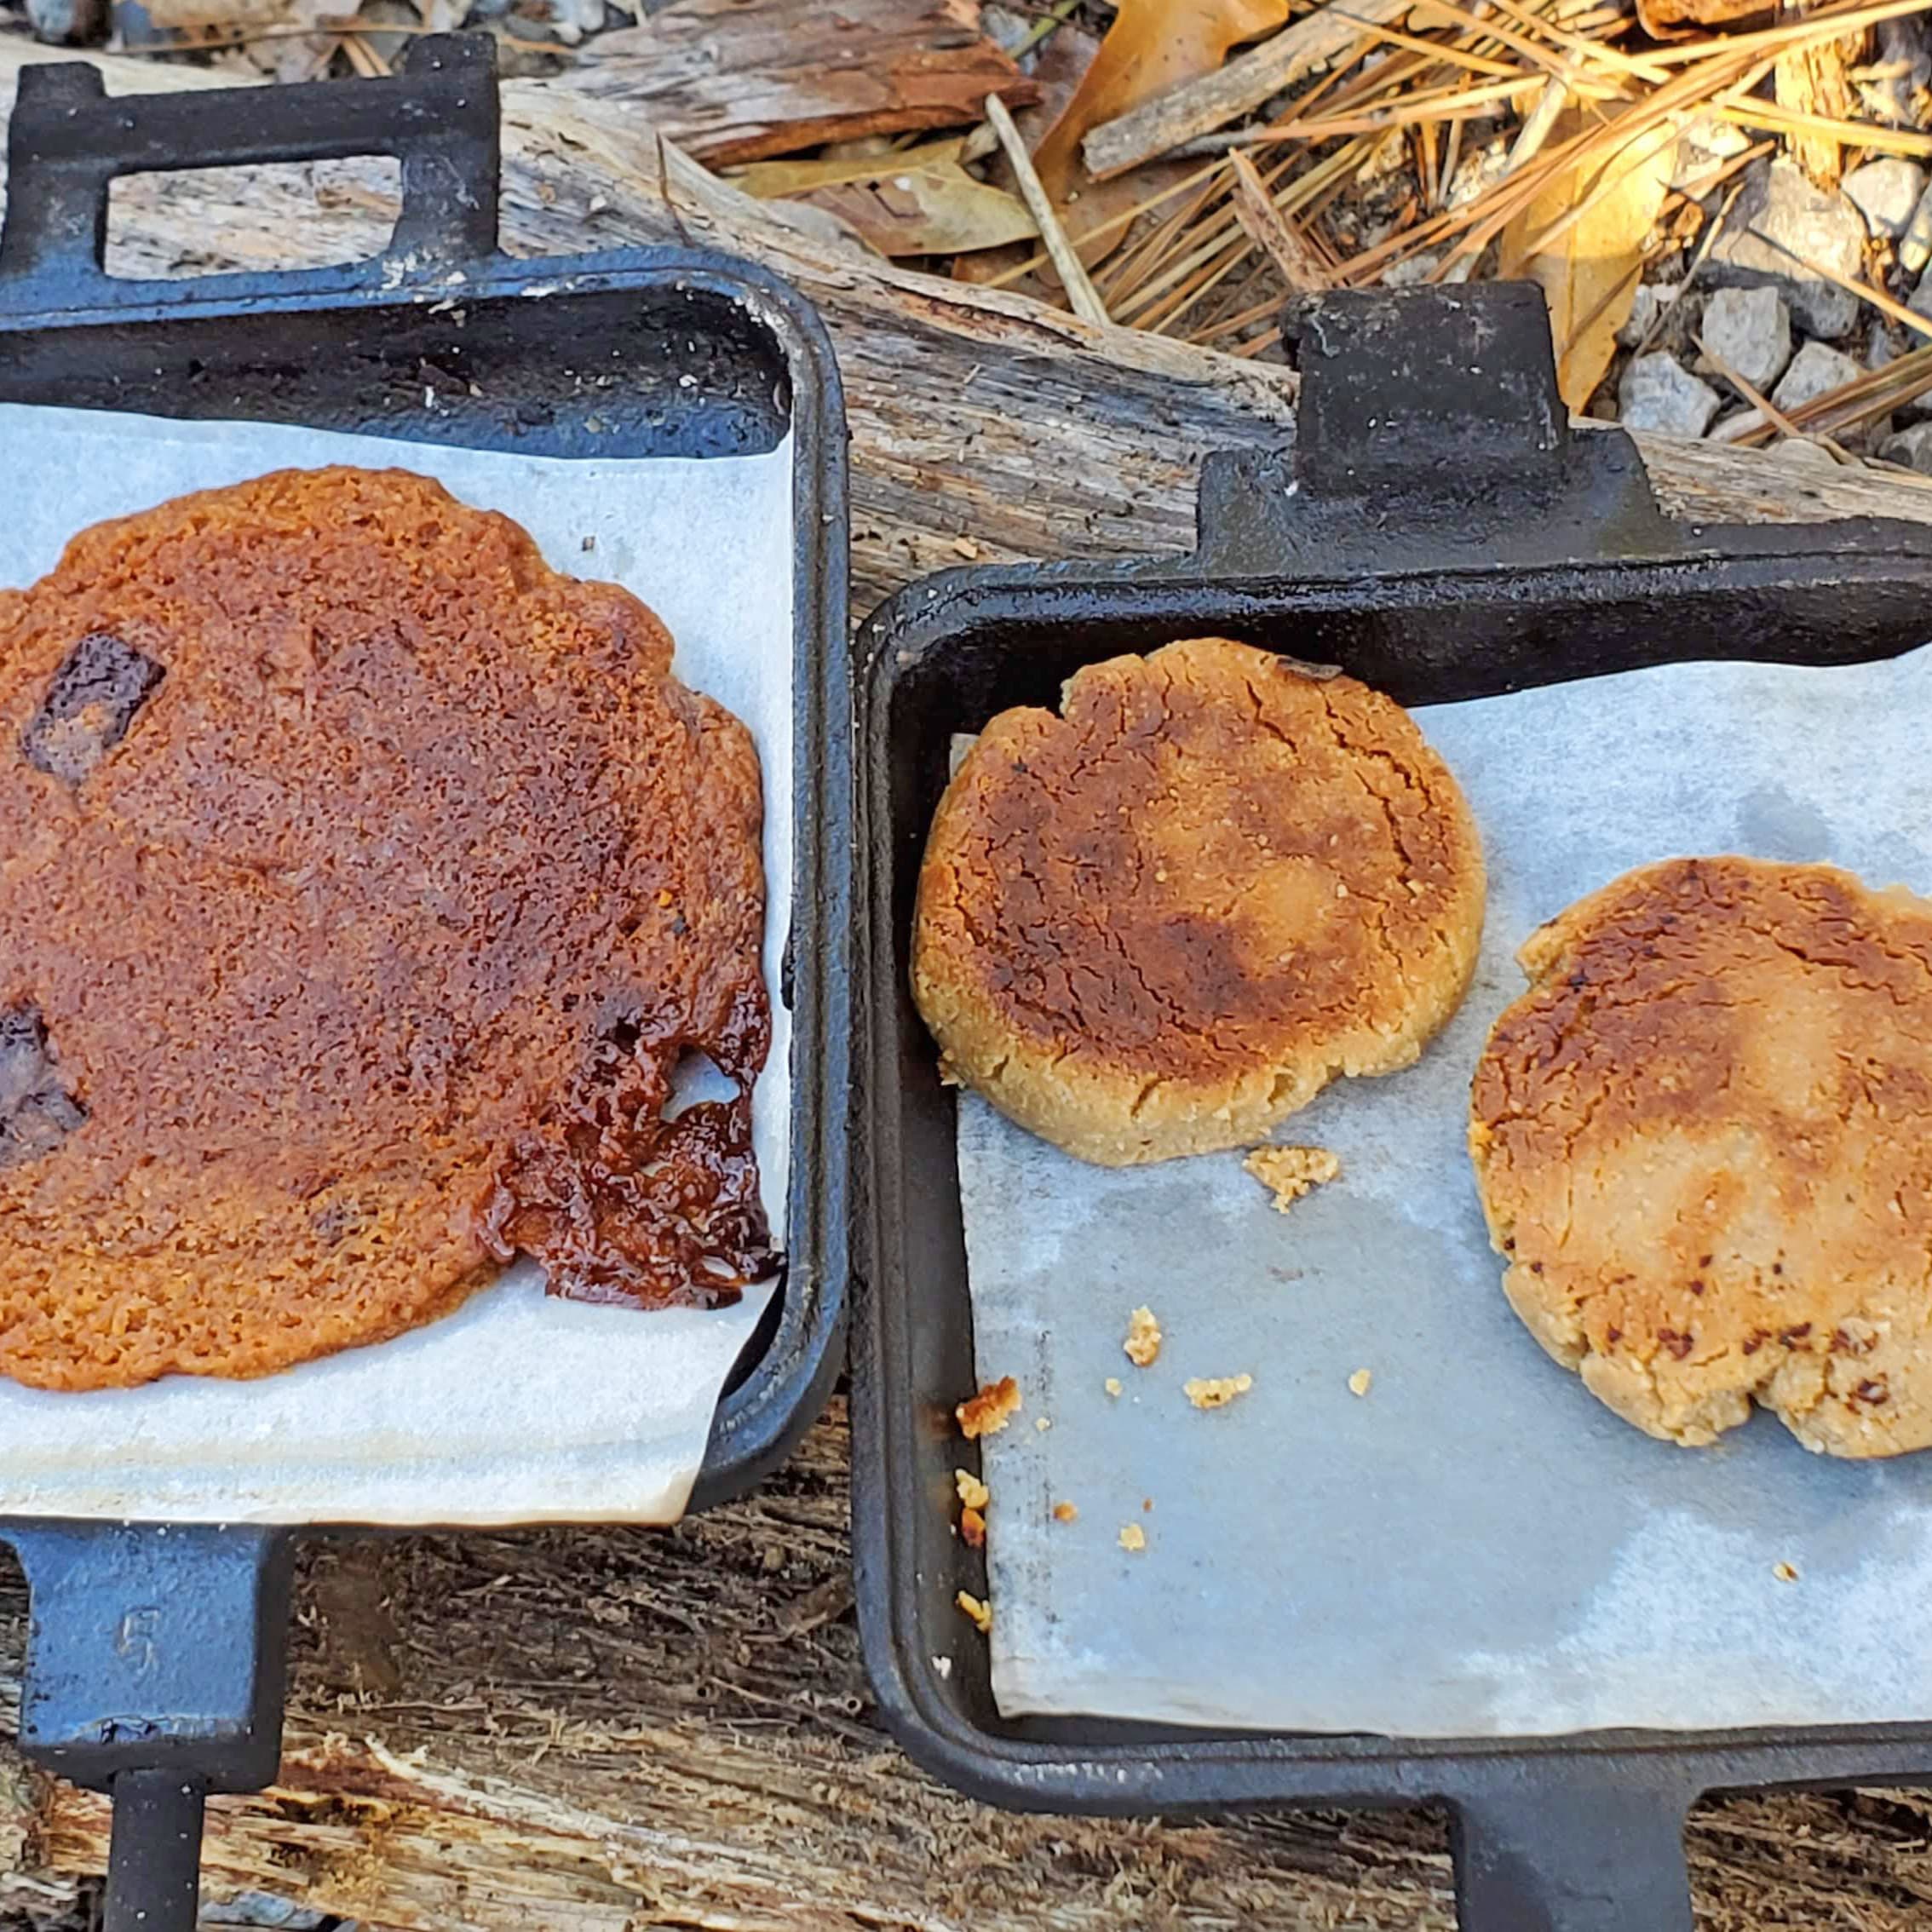 Camping Recipe: Giant Oreo Skillet Cookie - The Kitchen Magpie